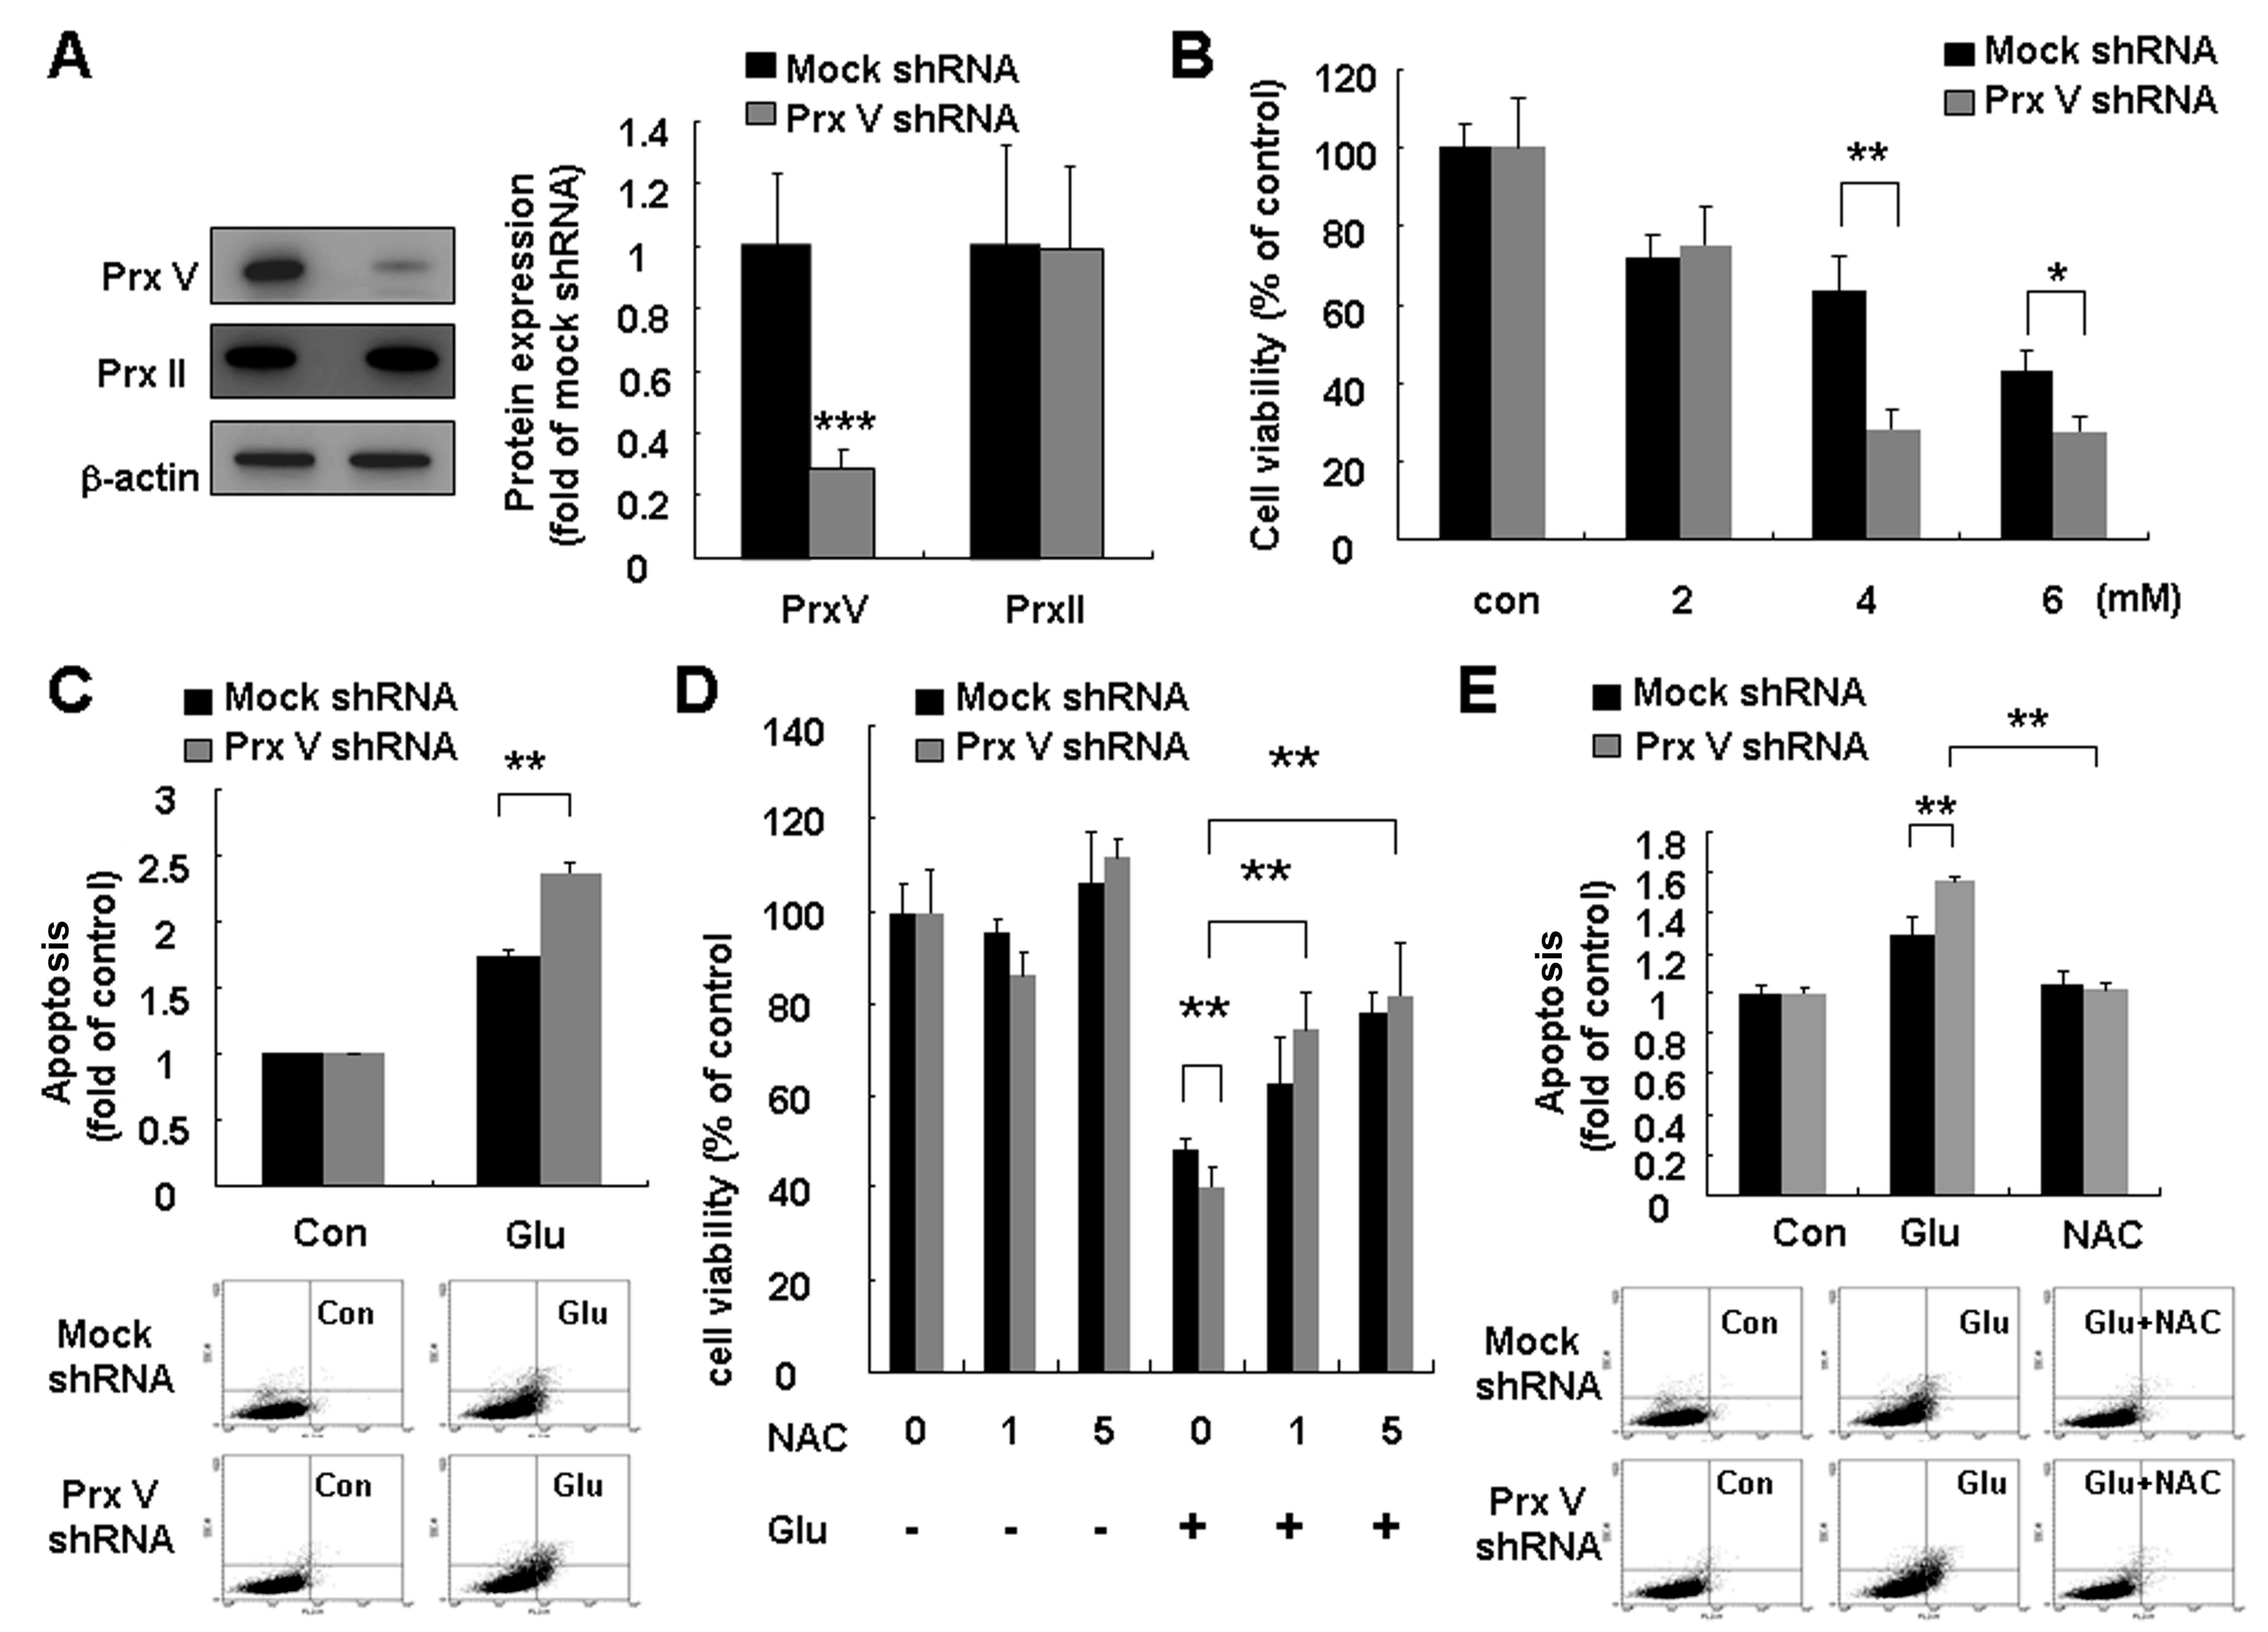 Knockdown Of Peroxiredoxin V Increases Glutamate Induced Apoptosis In Ht22 Hippocampal Neuron Cells